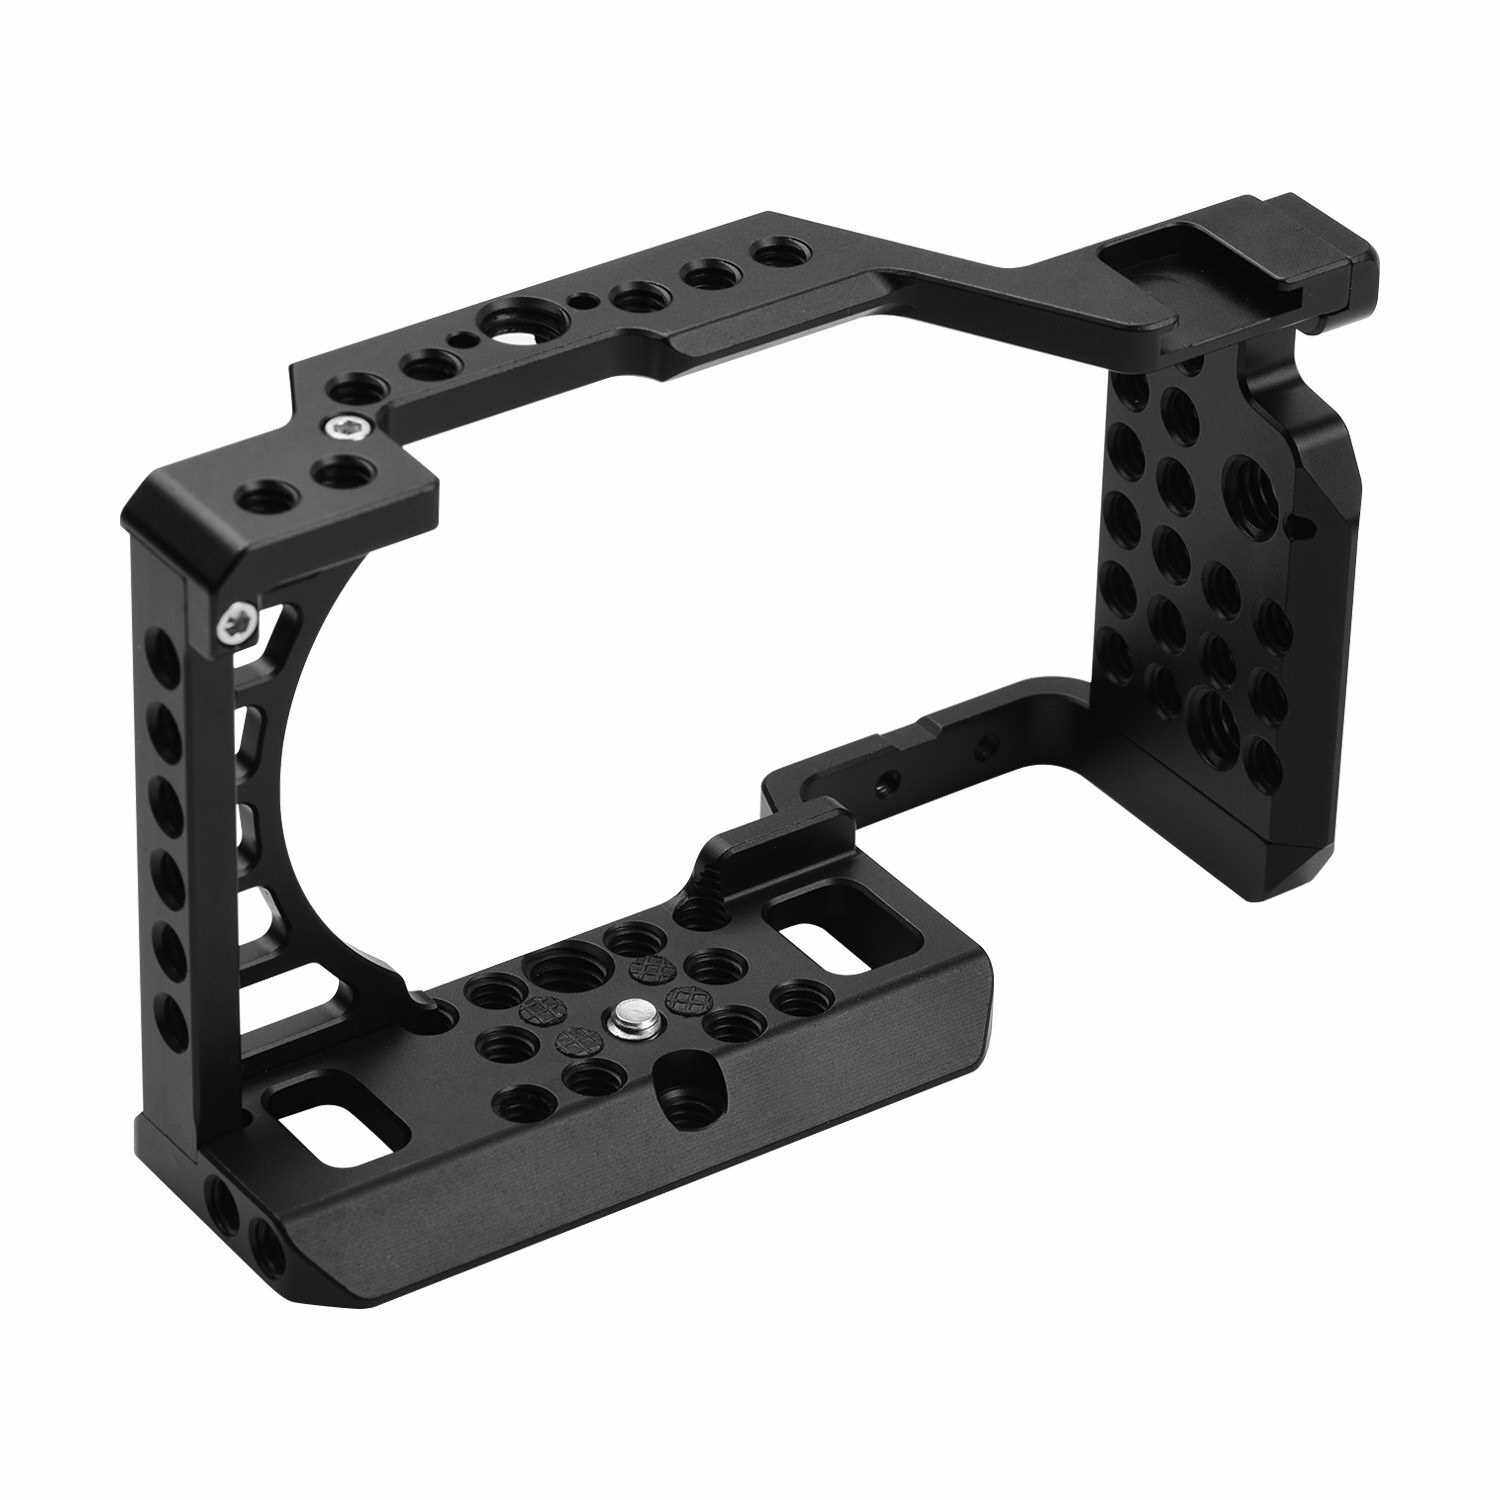 Aluminum Alloy Camera Cage Rig with Cold Shoe Mount ARRI Locating Hole 1/4 3/8 Threaded Holes Replacement for Sony A6000/A6100/A6300/A6400/A6500 Cameras (Standard)